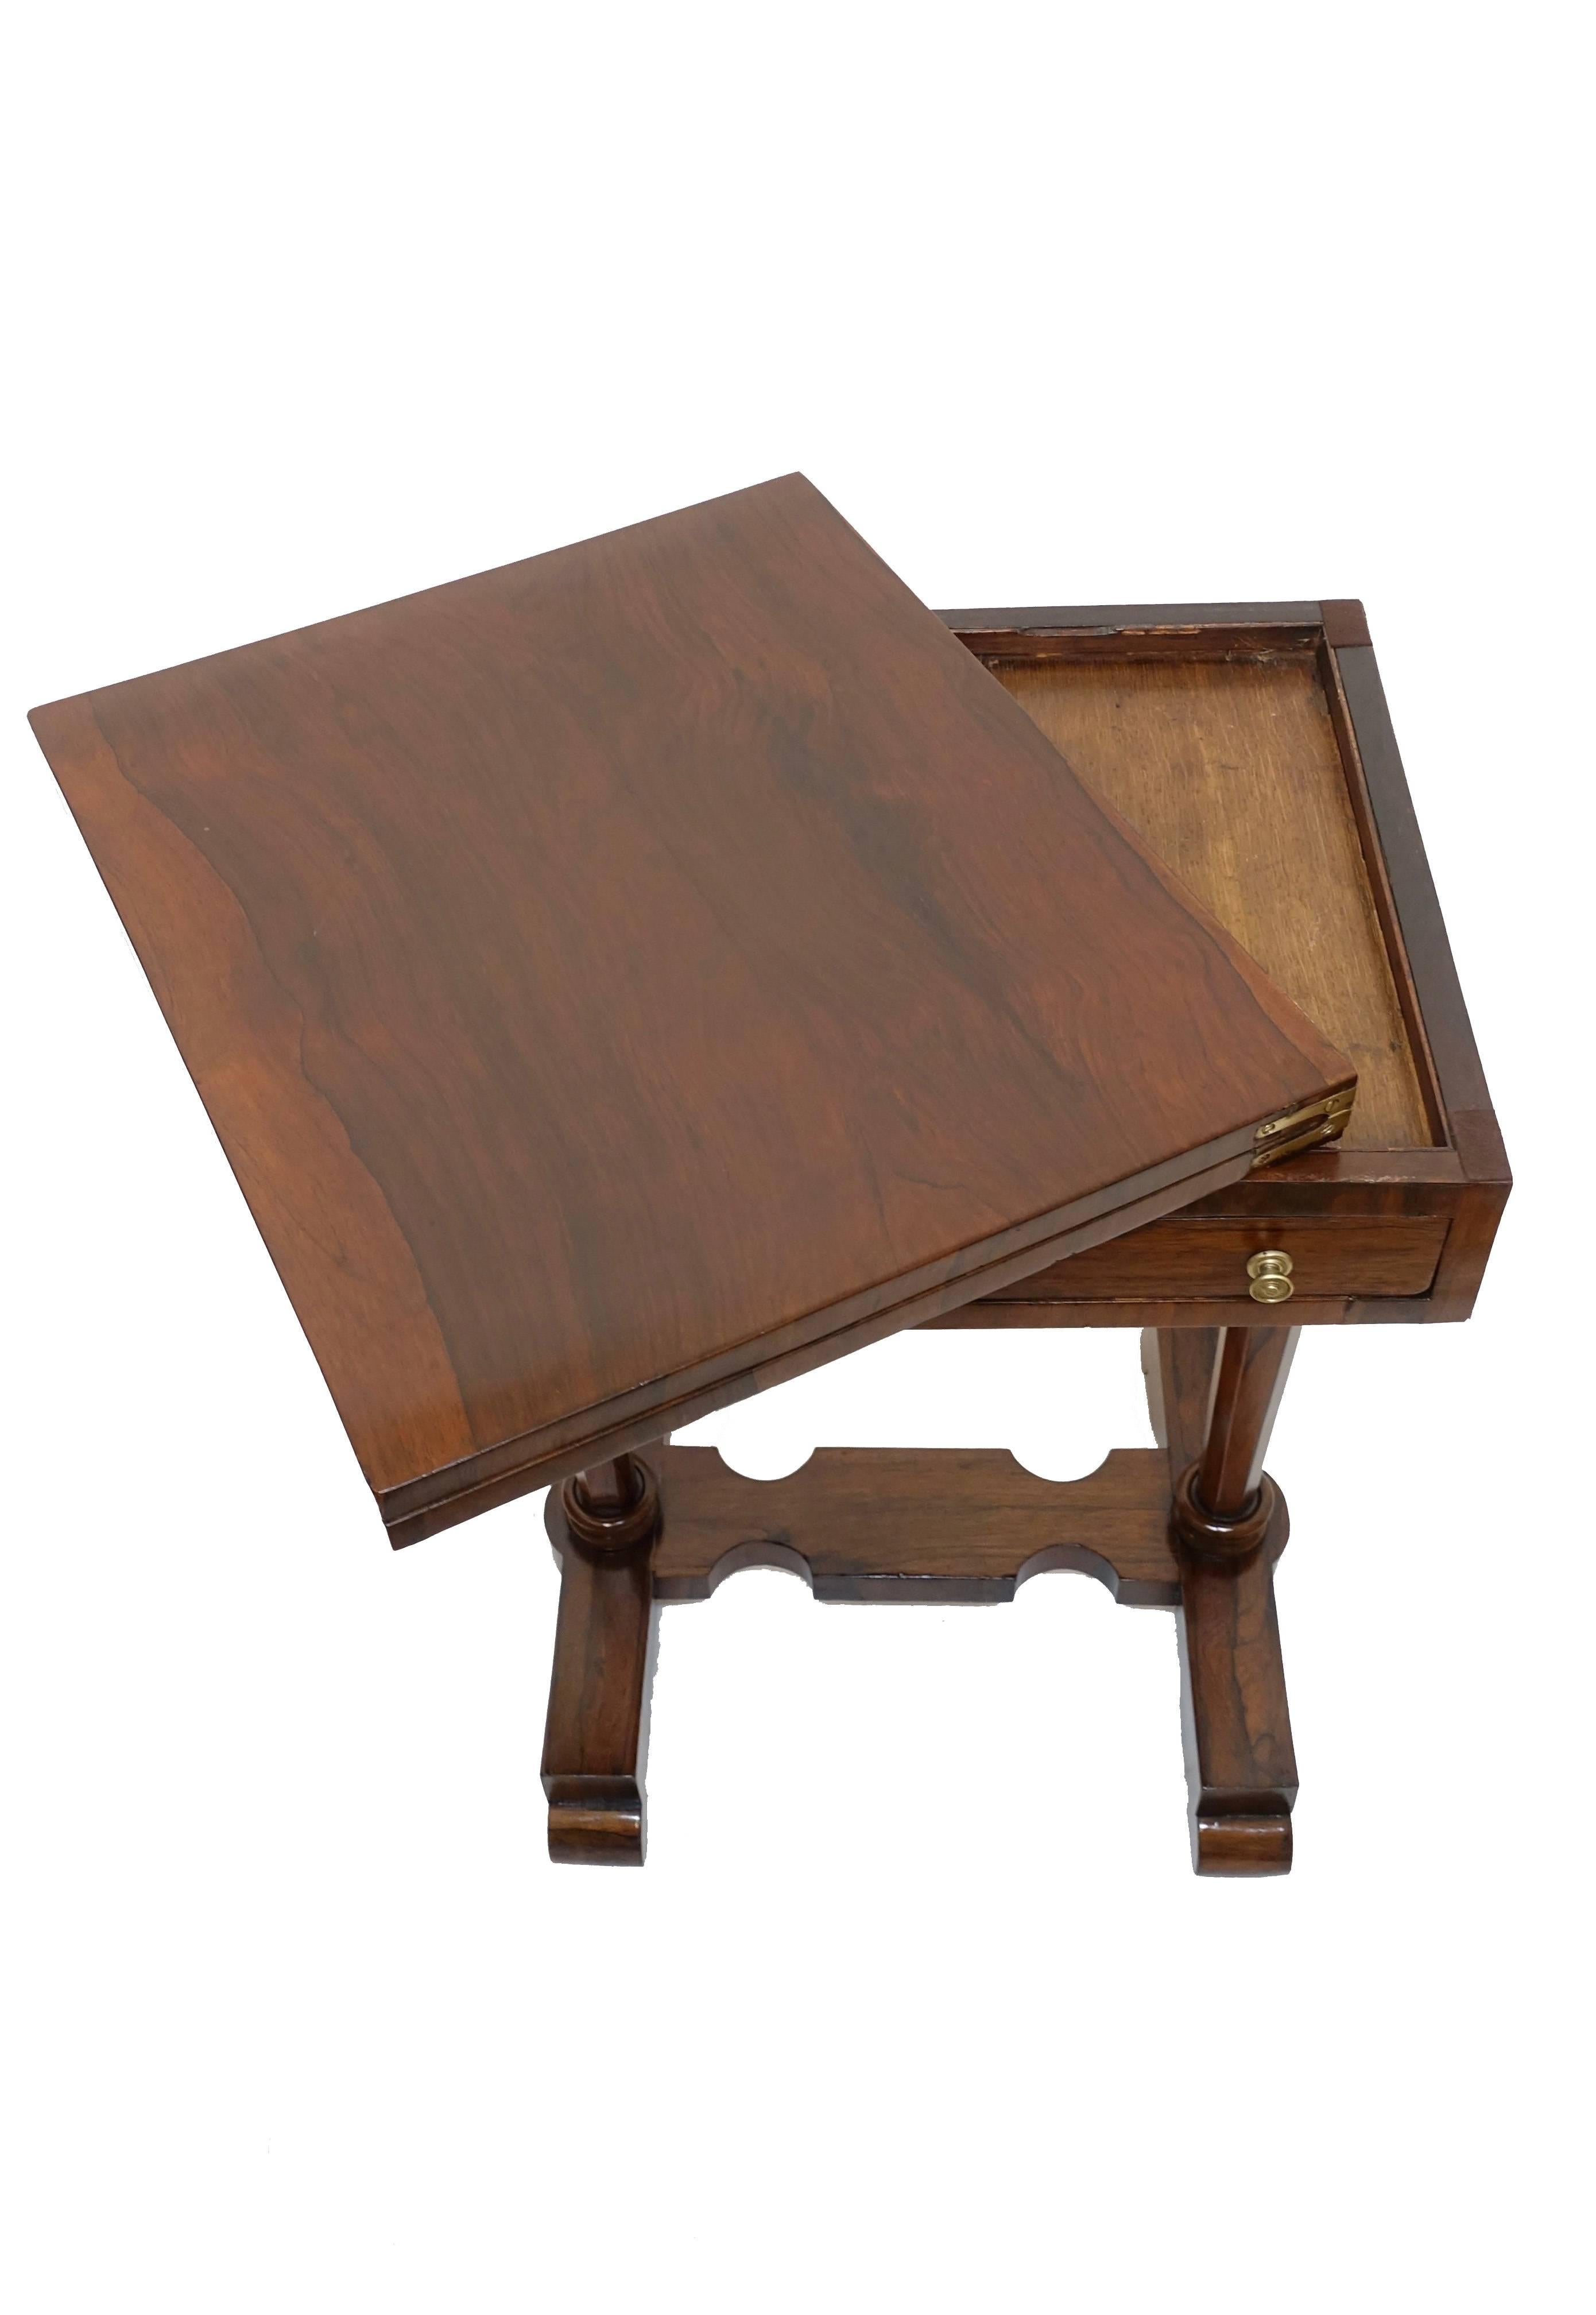 19th Century English Regency Rosewood and Leather Game Table